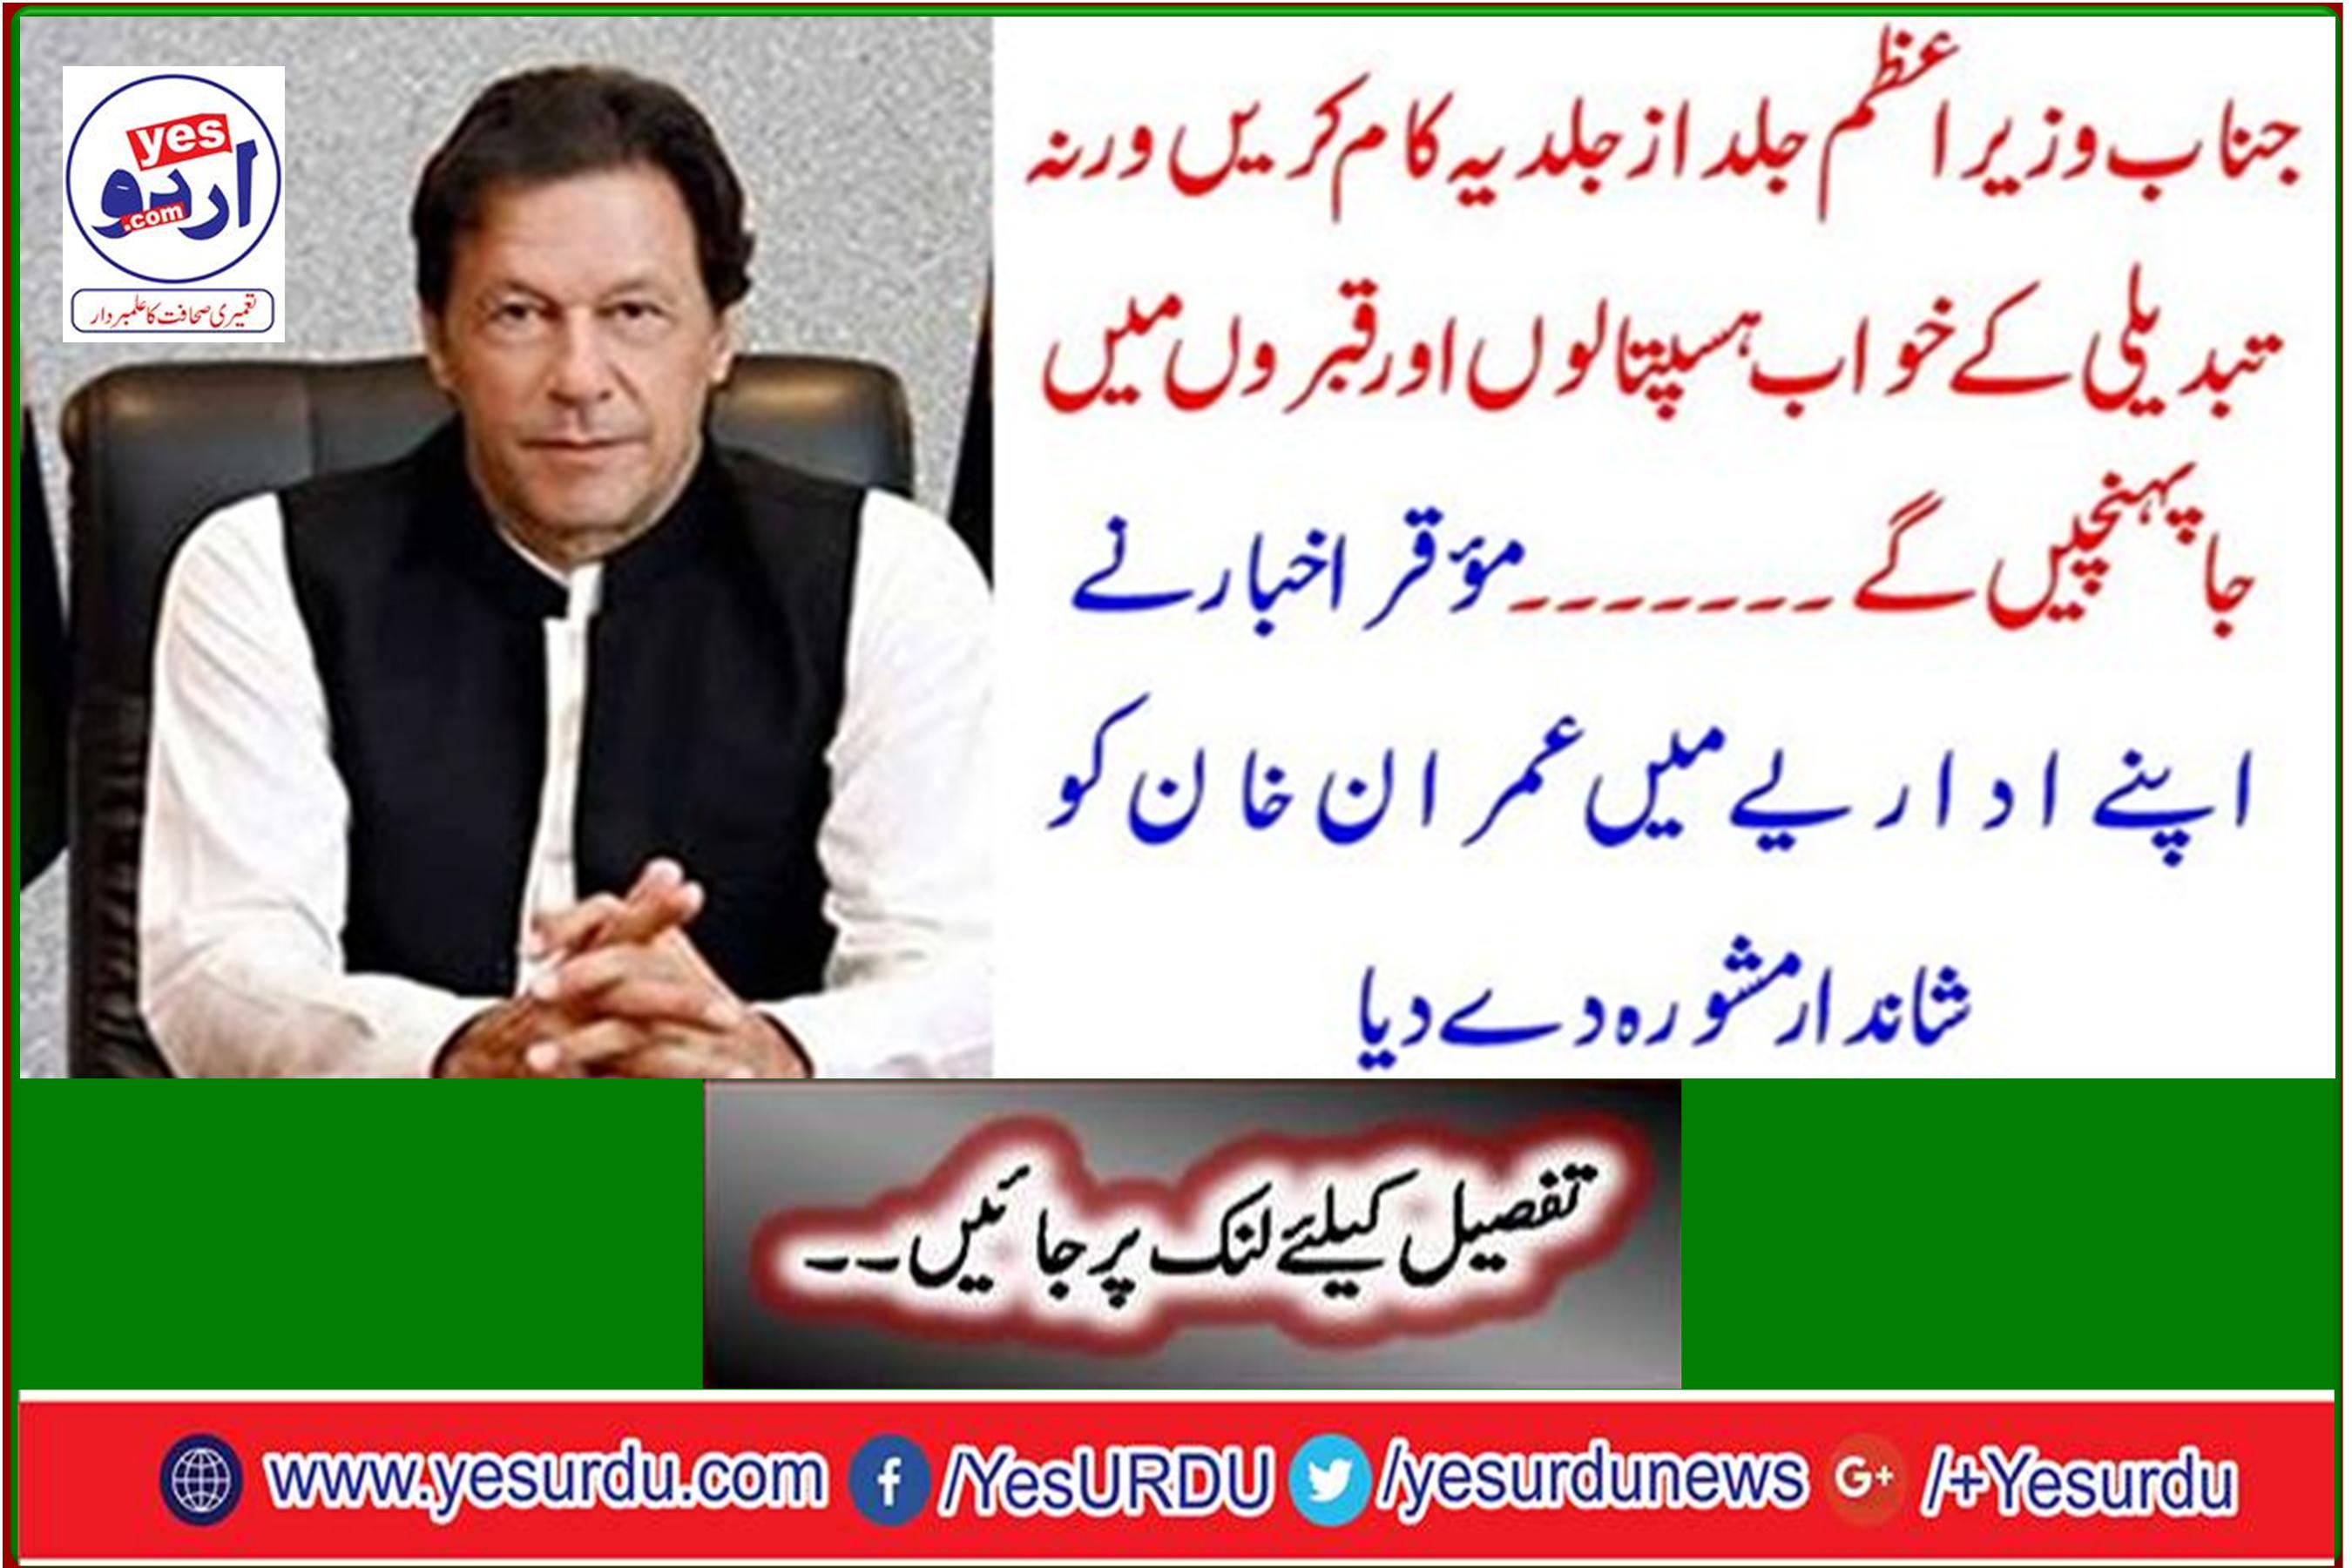 The Muqarqar newspaper gave Imran Khan excellent advice in his editorial